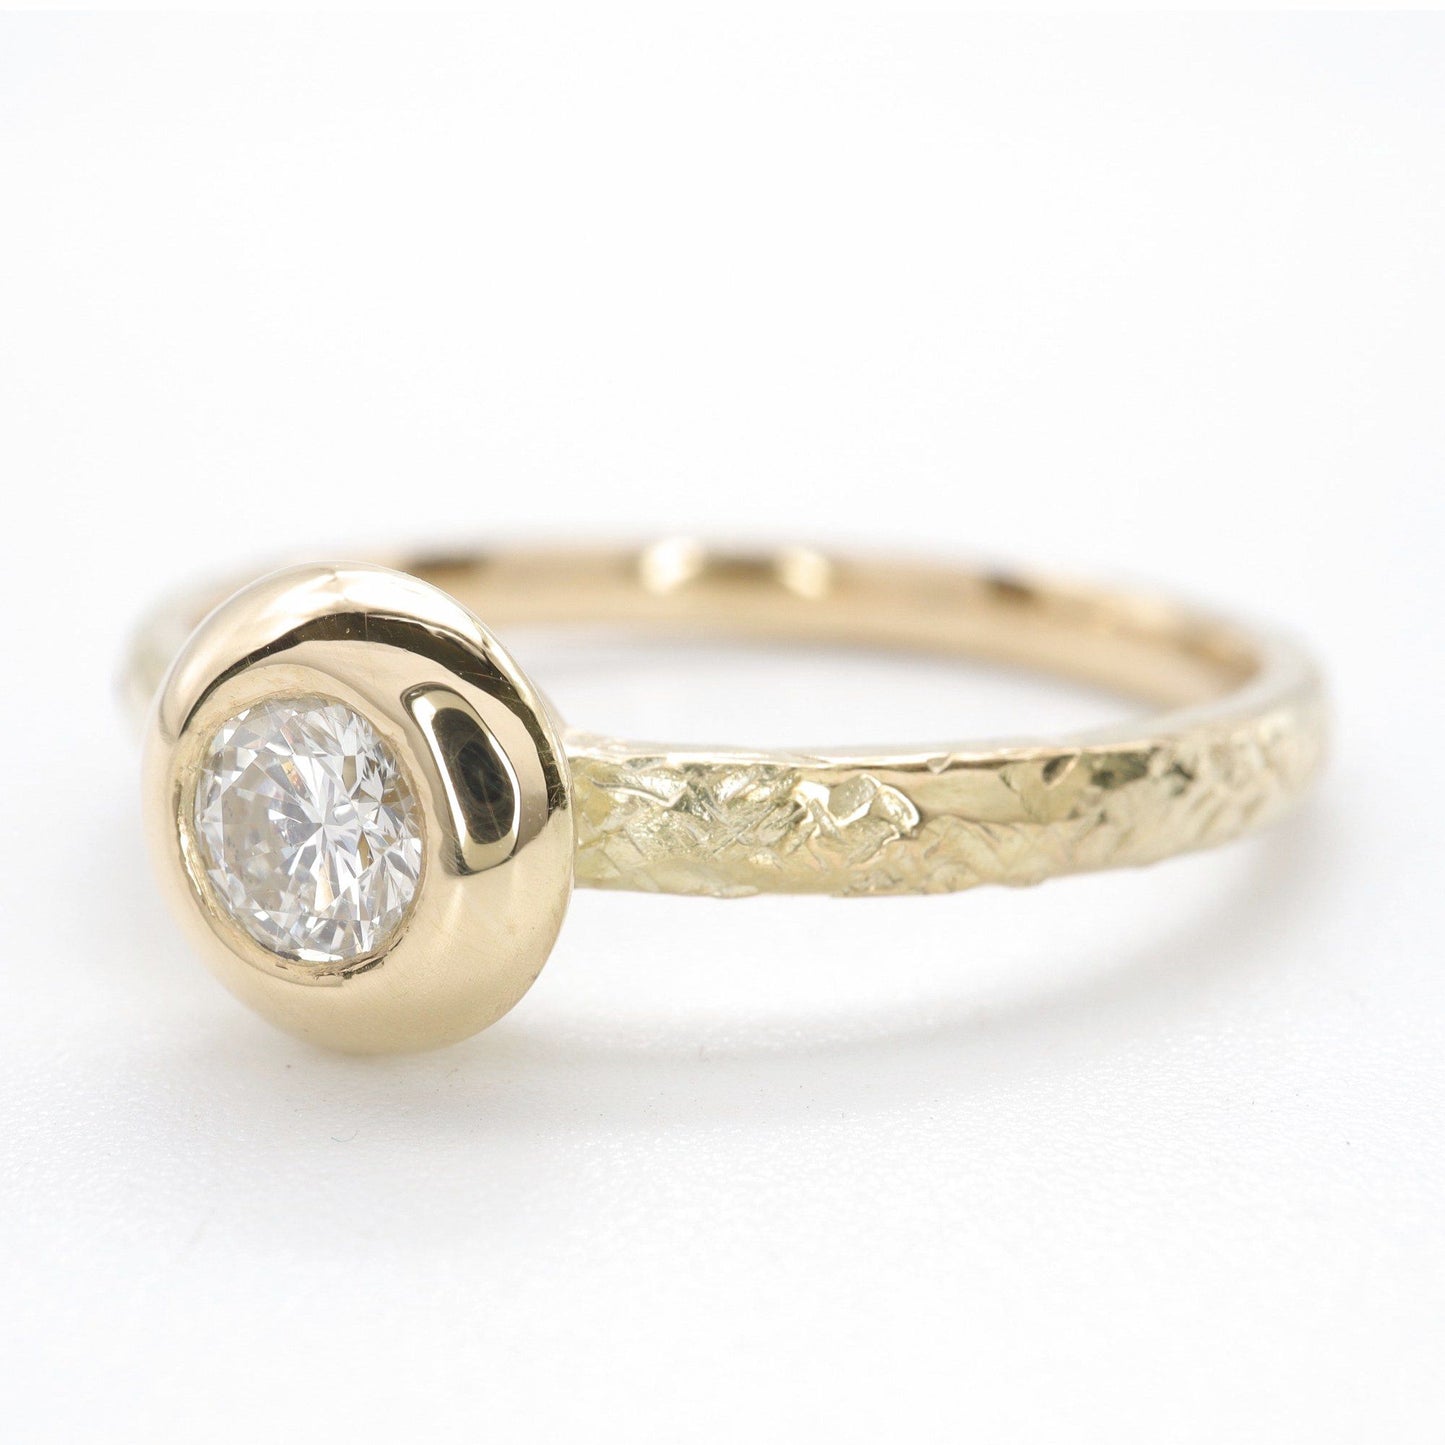 Solitaire diamond ring in 18ct yellow gold with a wide edge setting